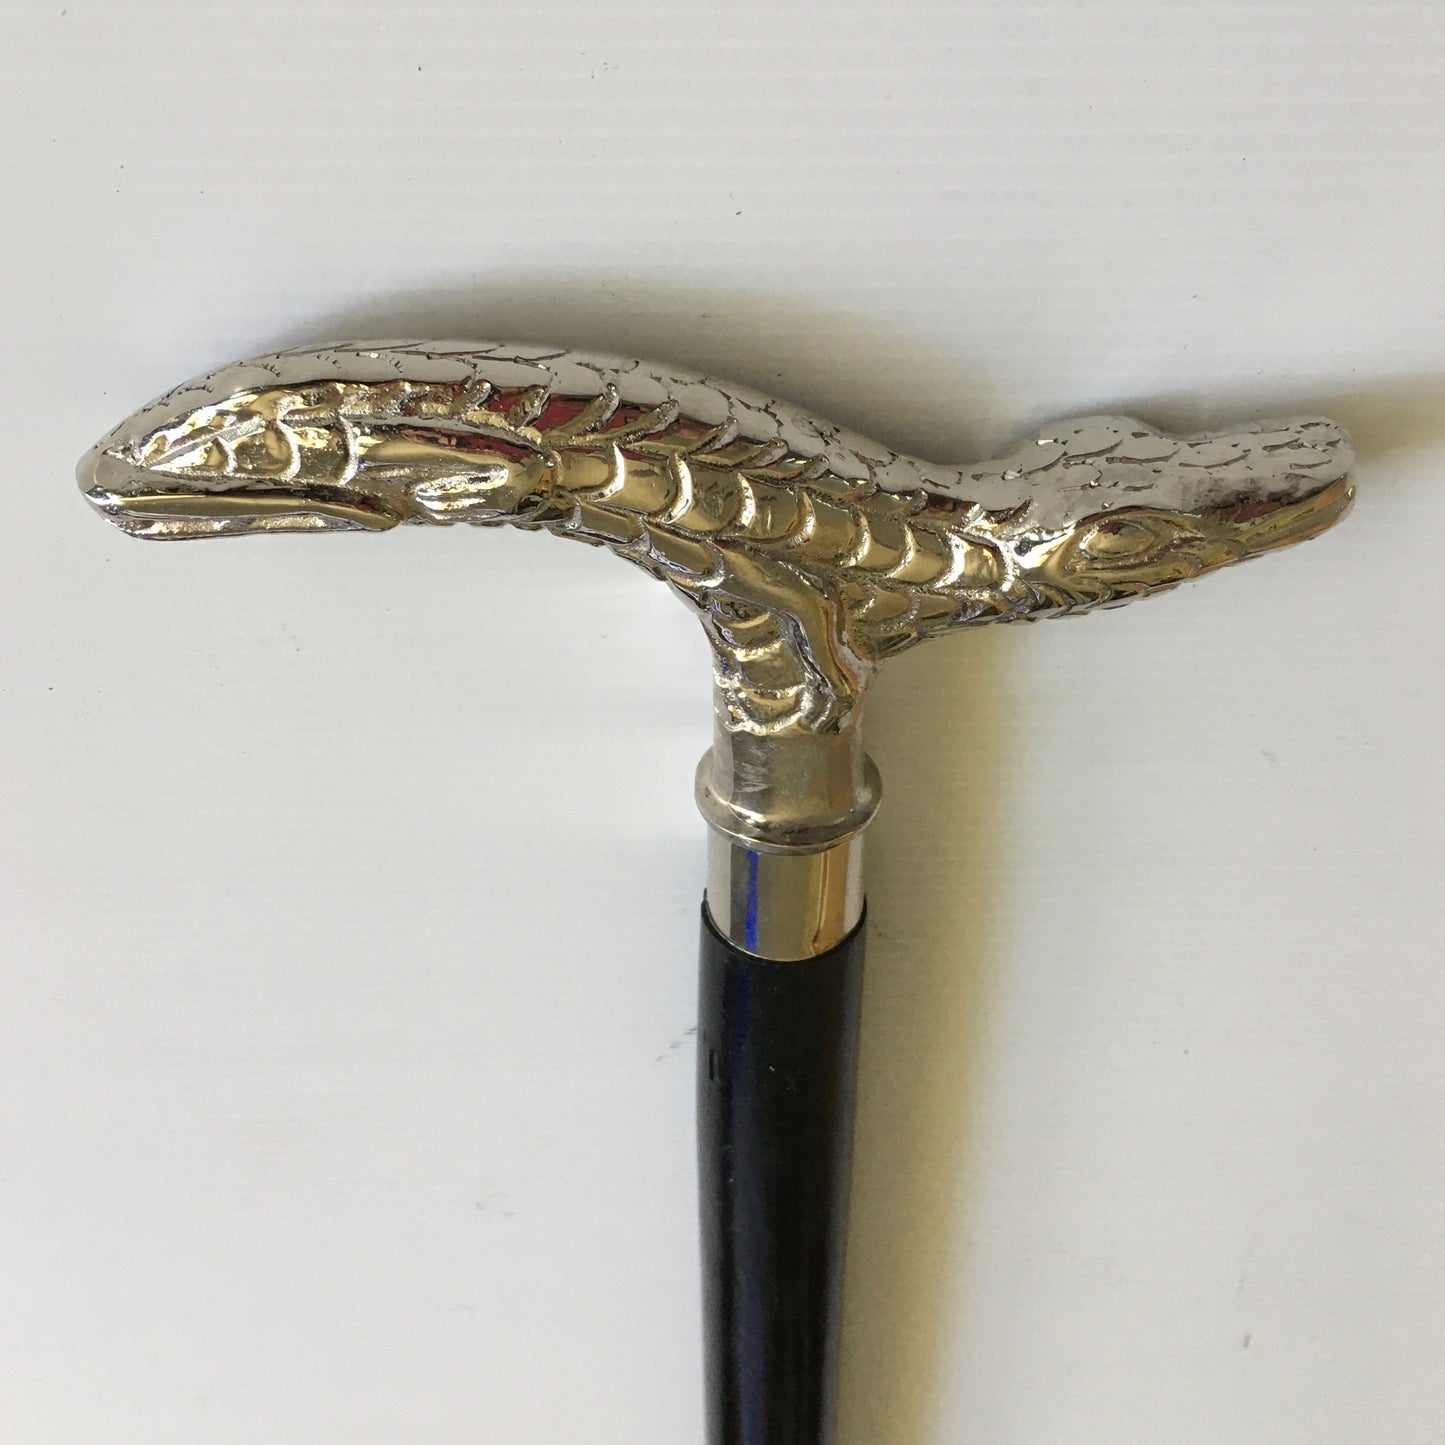 Walking Stick with comfortable Silver Crocodile Handle on a black stick